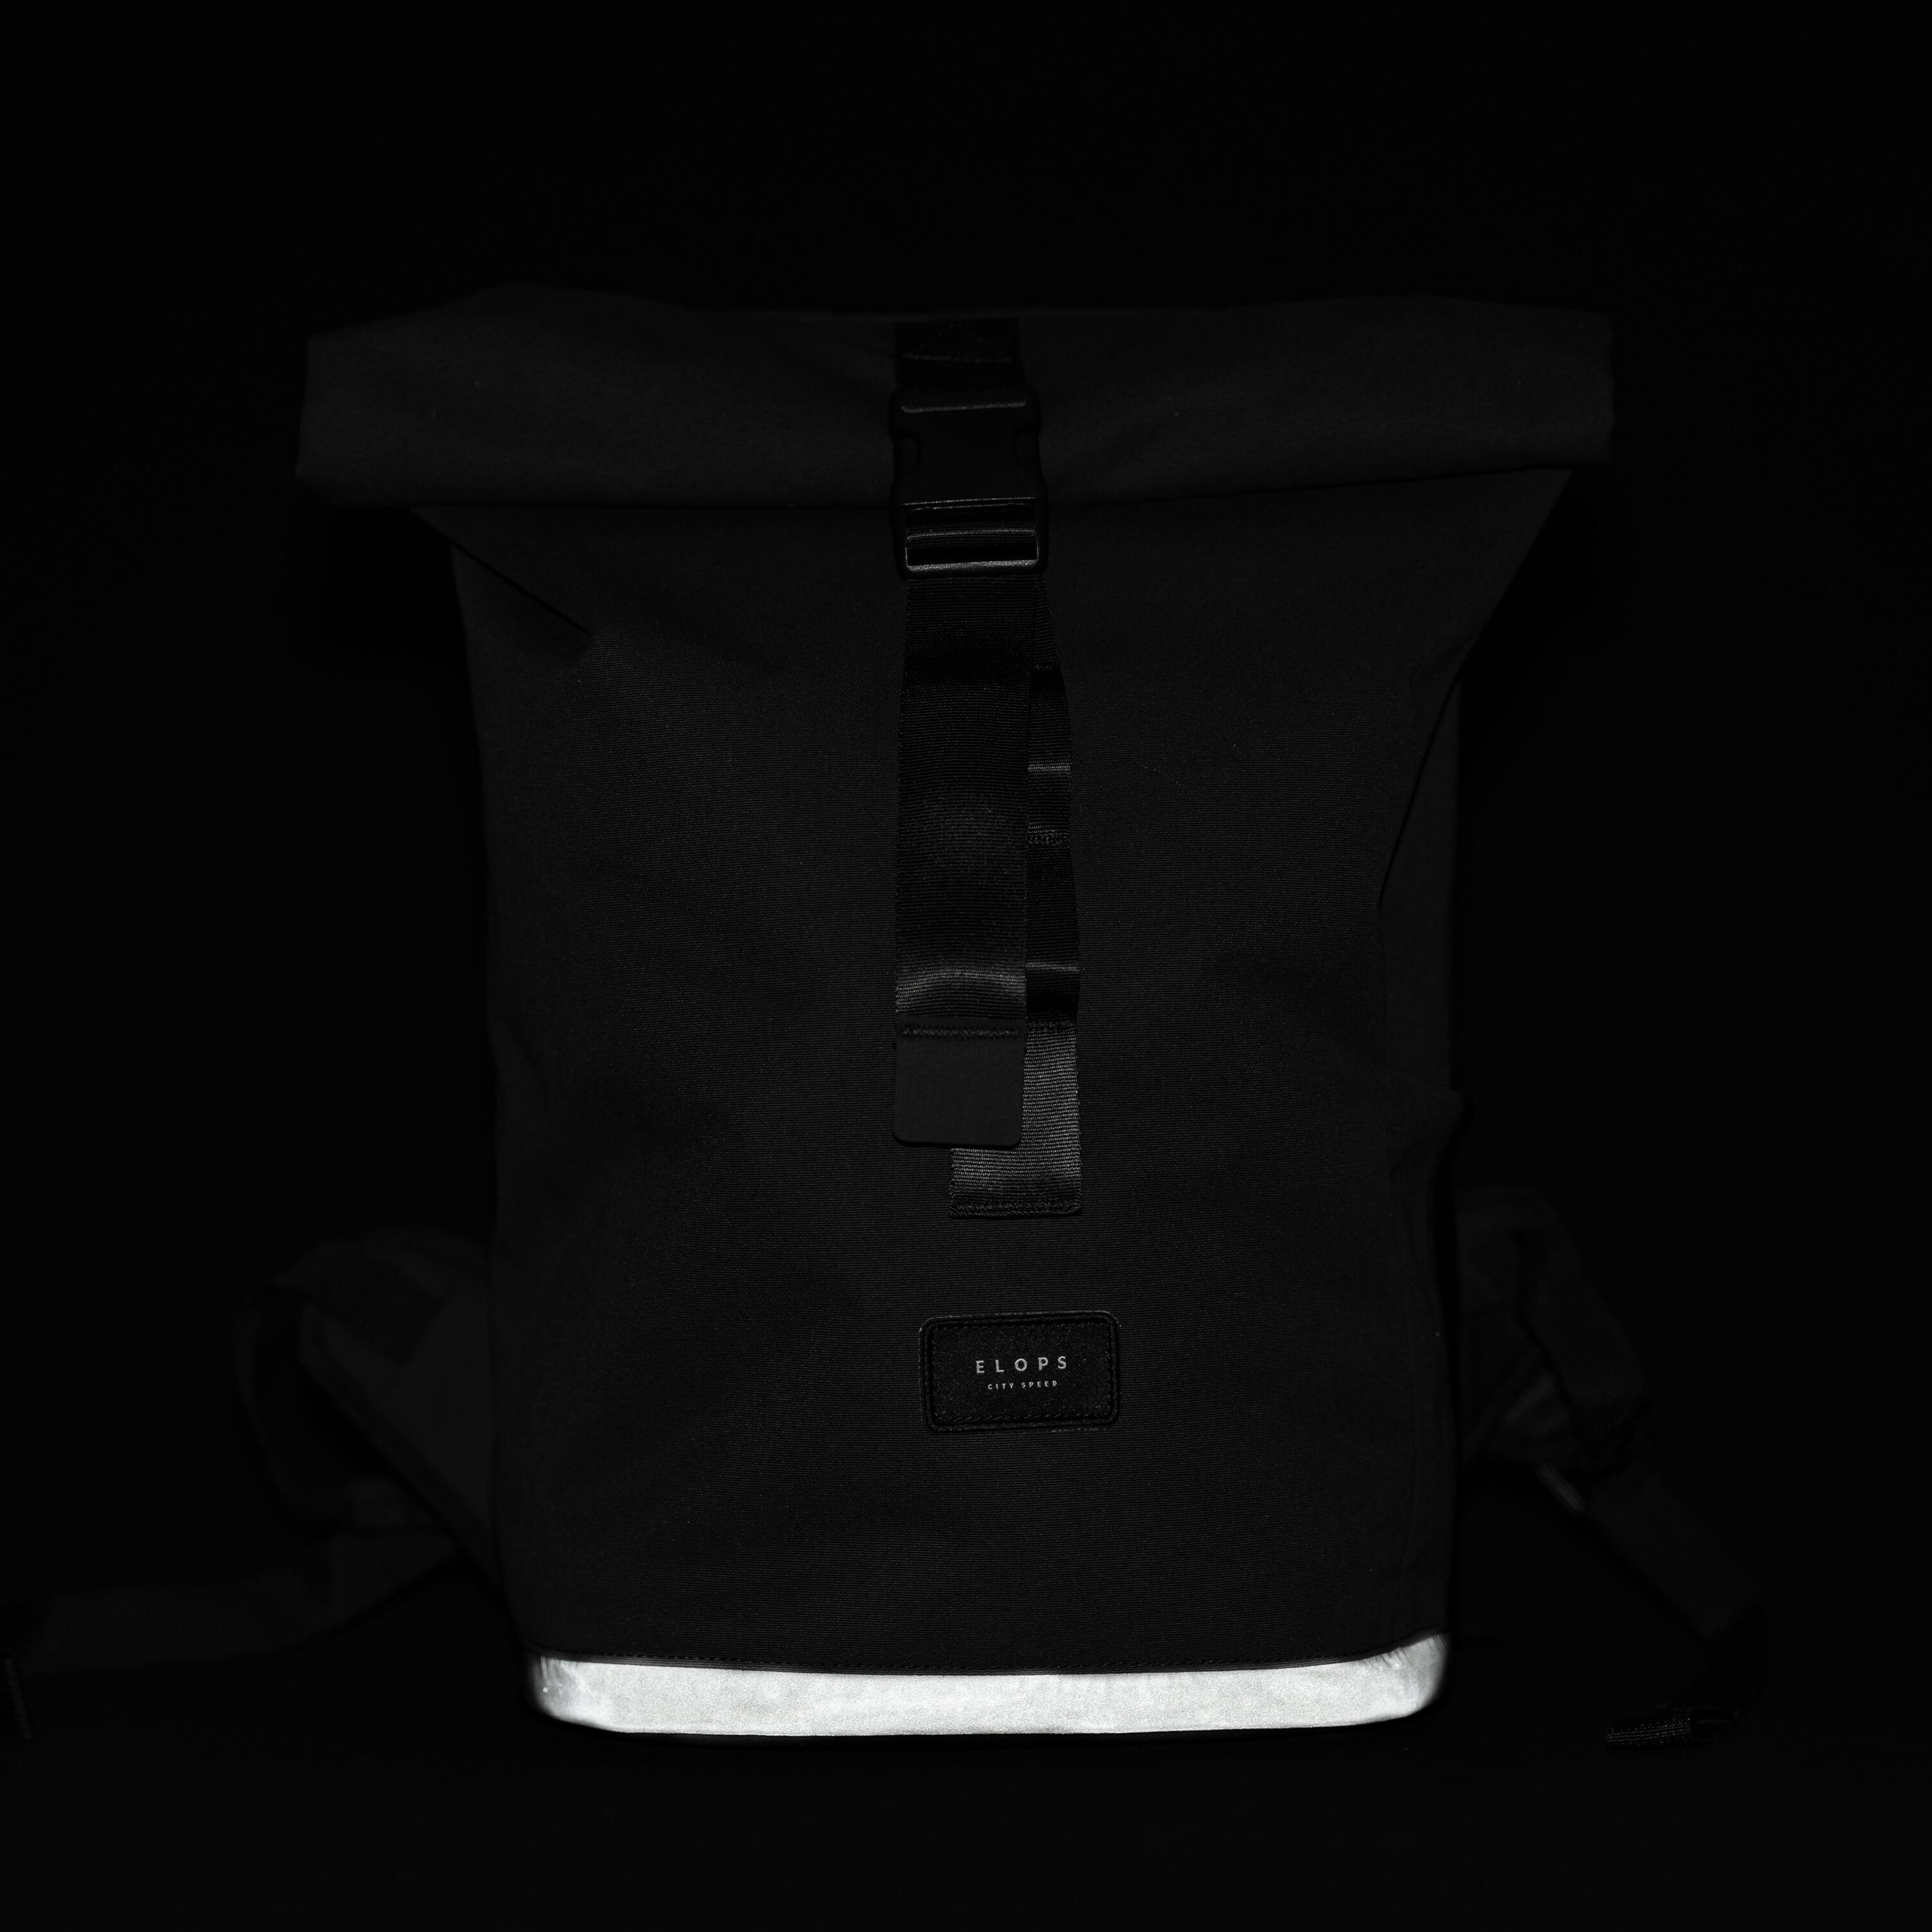 20L Cycling Backpack Elops Speed 100 10/13